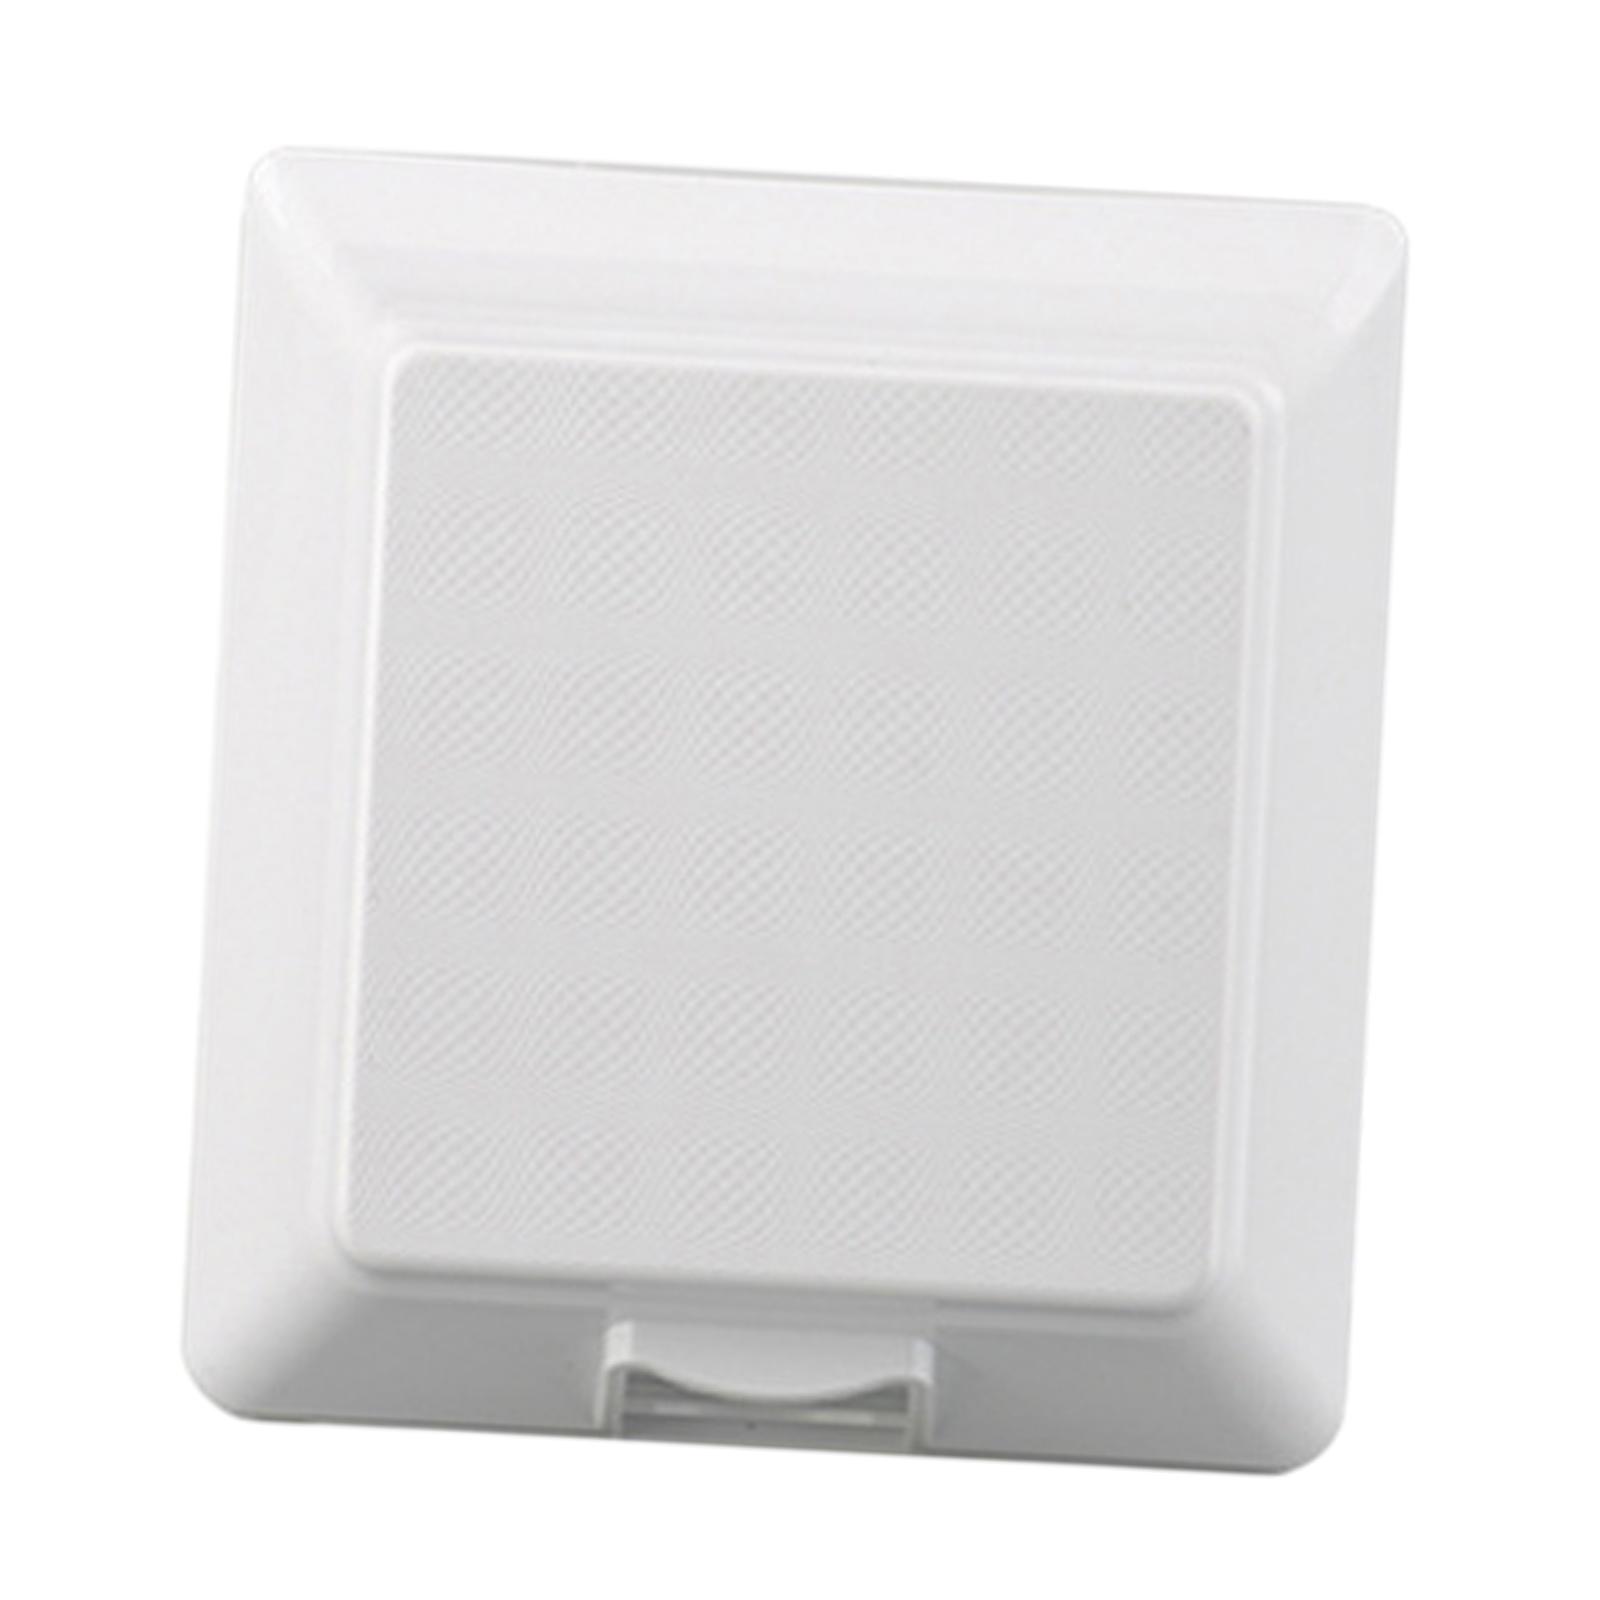 Switch Cover Waterproof Wall Switch Box for Home Improvement Workshop Office White